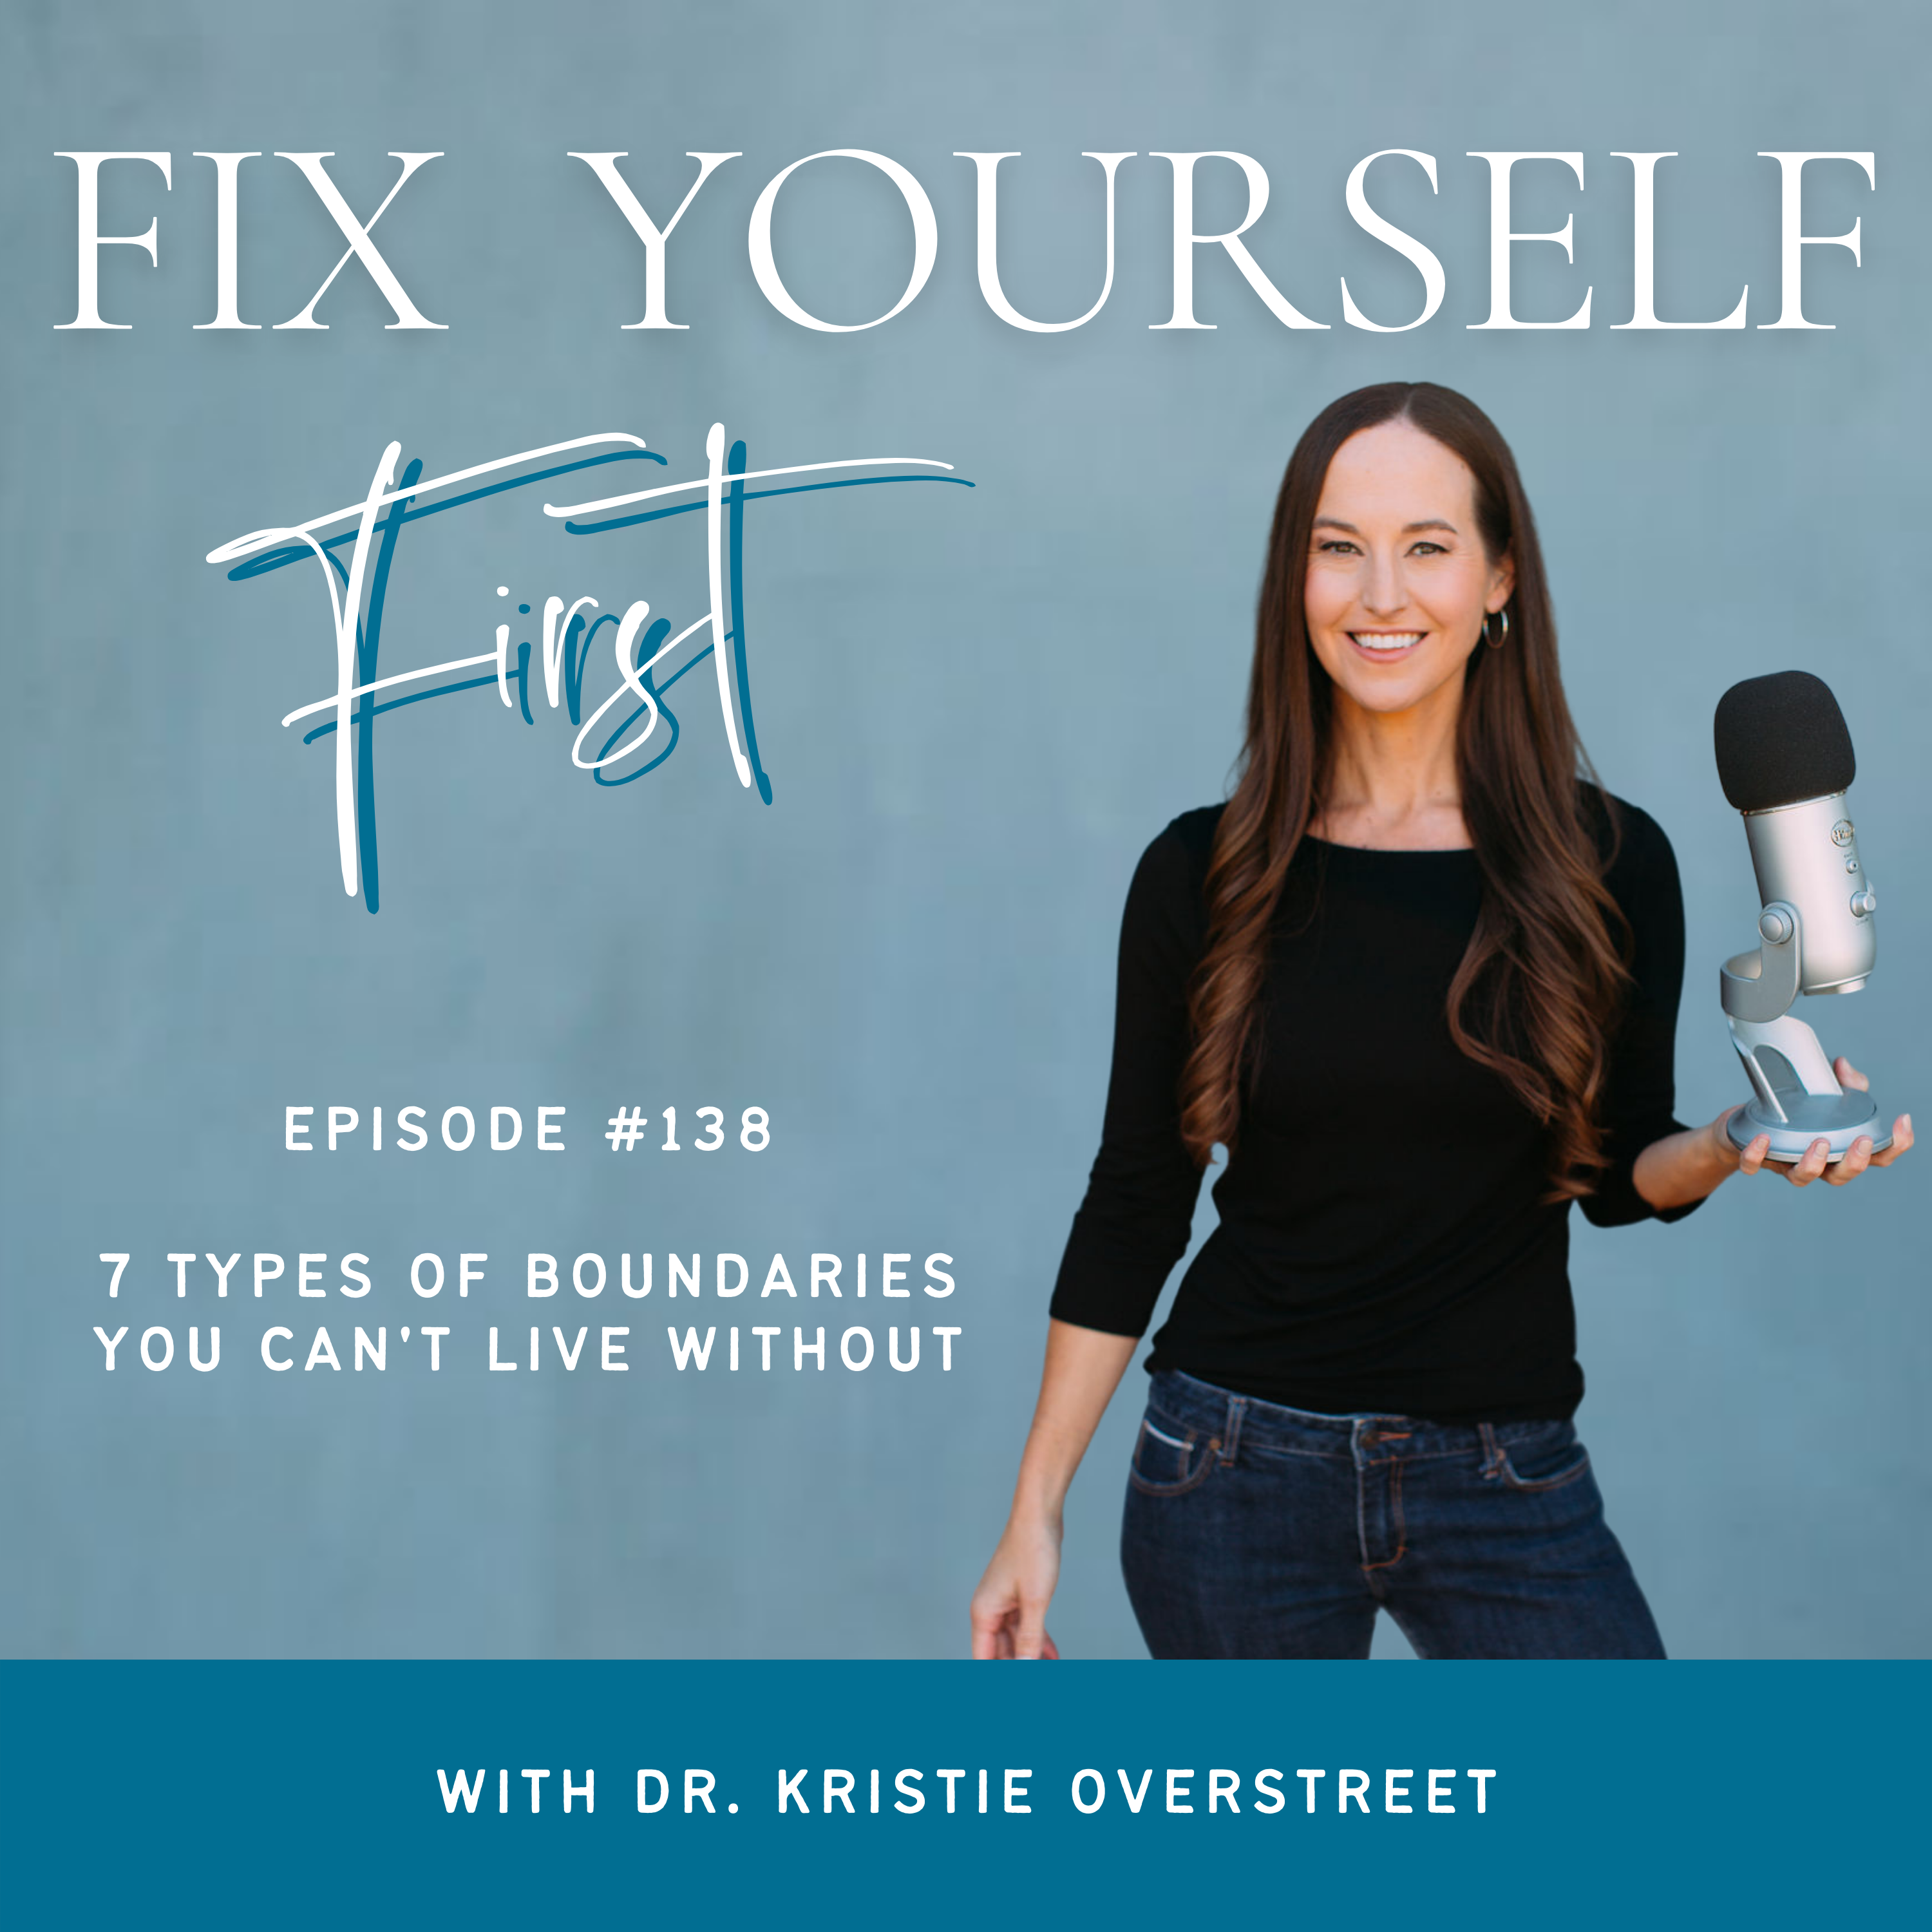 Fix Yourself First Episode 138 7 Types of Boundaries You Can't Live Without